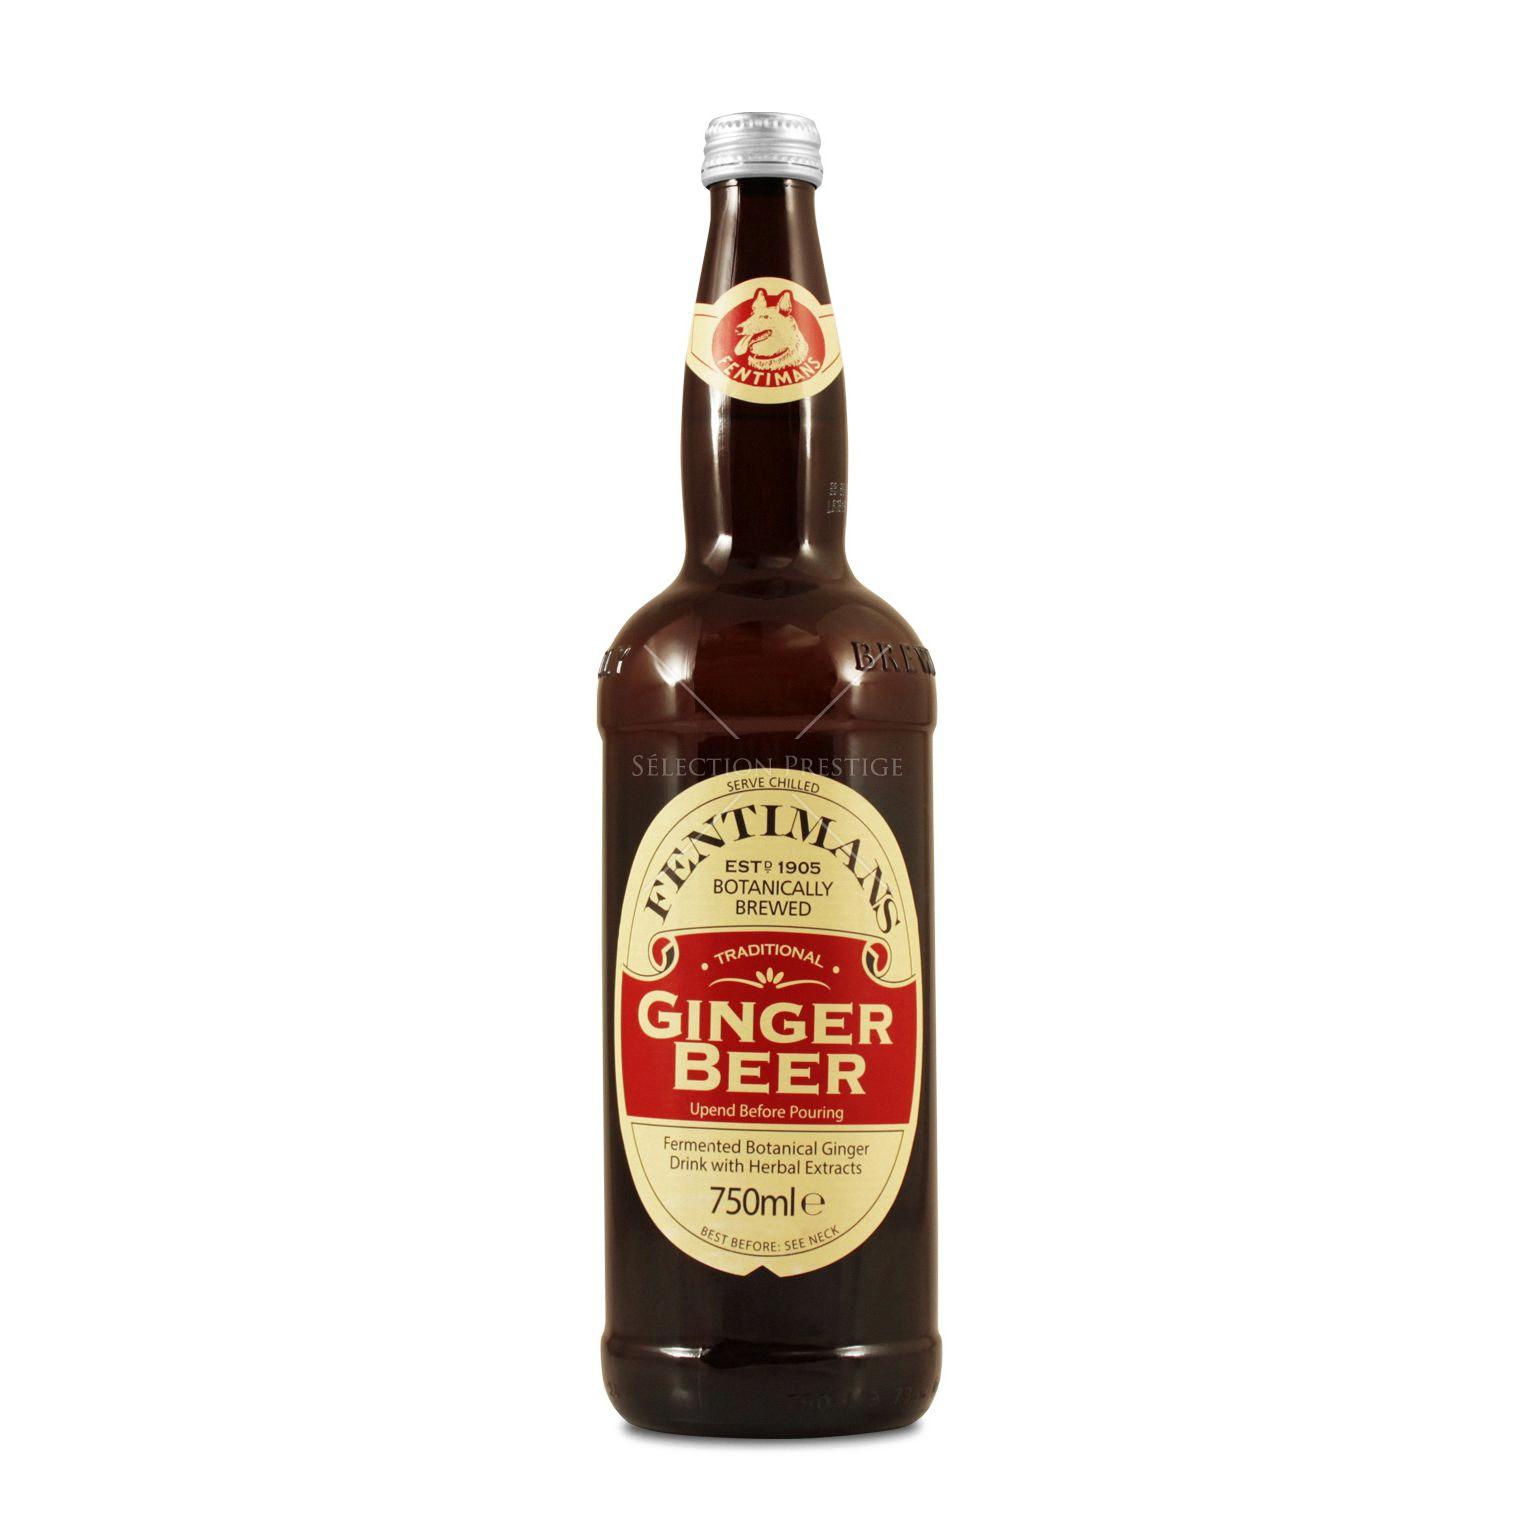 is ginger beer alcohol free